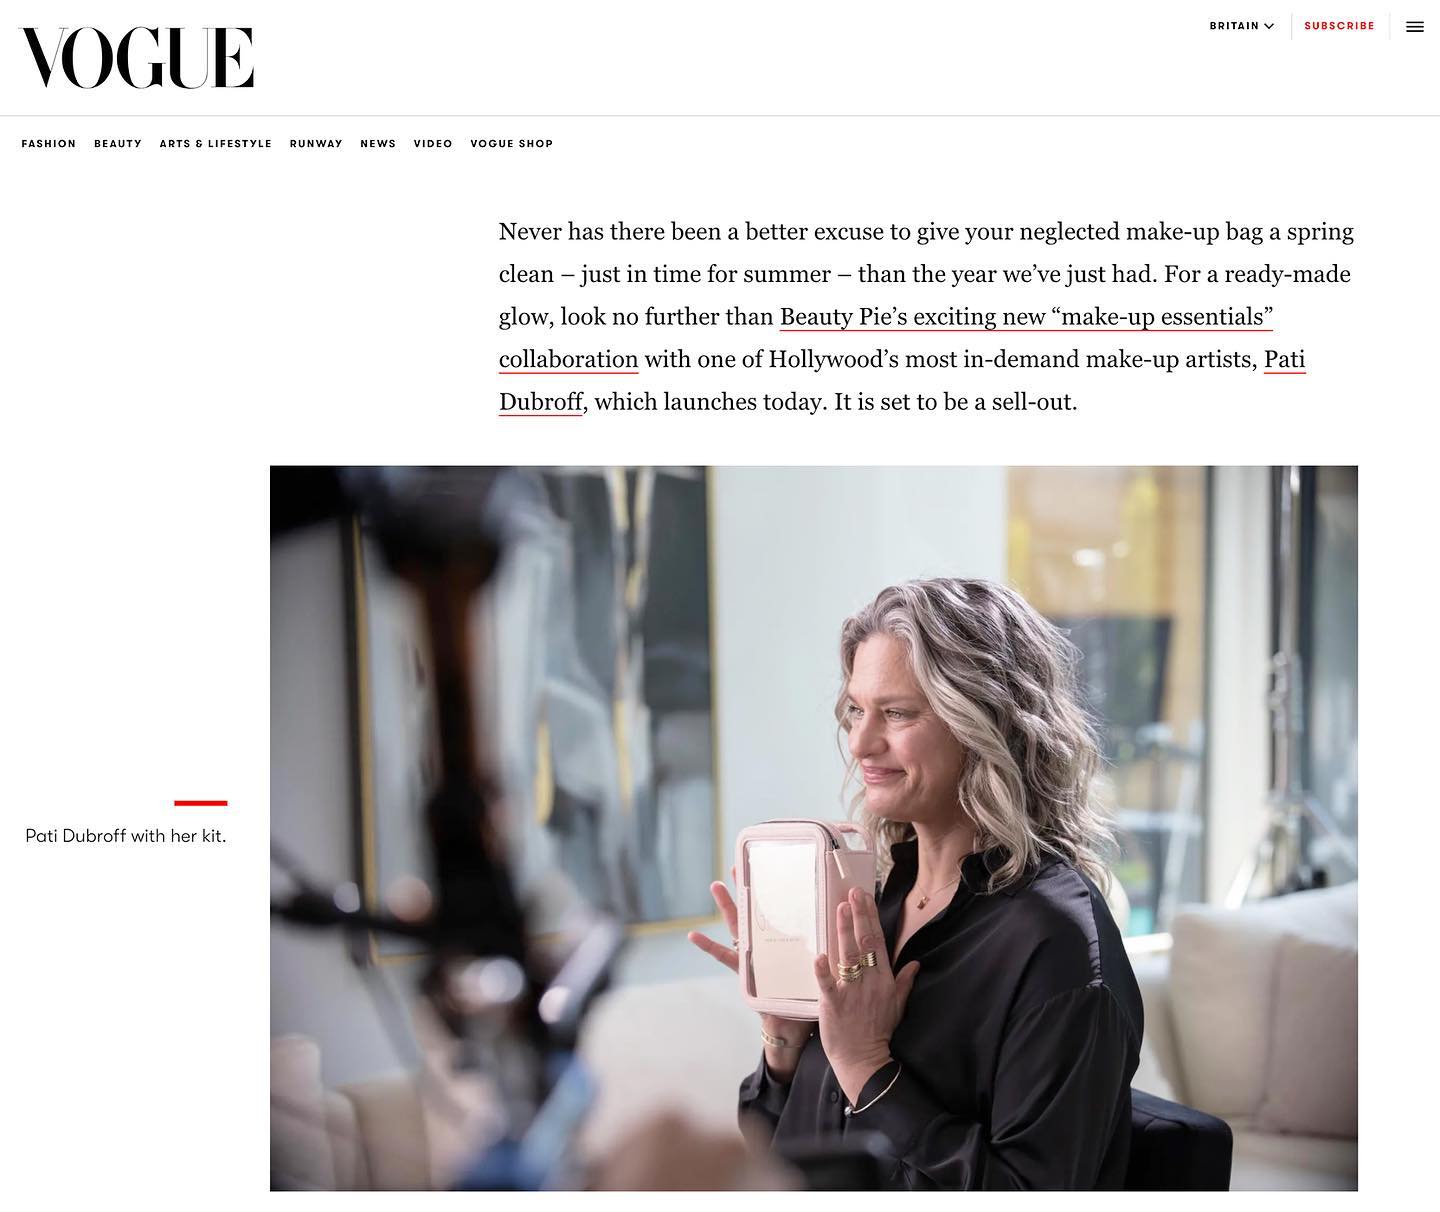 ⚡️Tbt Vogue Britain article written on the Beauty Pie x Pati Dubroff Essentials Kit. 
Content we produced for their launch was in conjunction with the @beautypie team!
Vogue Article Photo Credit: @rainavirginia 
Launch Photos and cinematography by @fiorella_occhipinti 
Main Talent / MUA:  @patidubroff 
Production: @tigerhousefilms 
Creative Coordinator: @lucabuzas 
Hair Stylist: @christianmarc 
BTS: @rainavirginia 
#makeup #beauty #makeupartist #fashion #love #mua #photography #like #beautiful #instagood #makeuptutorial #model #follow #style #instagram #girl #photooftheday #art #cute #skincare #selfie #makeuplover #photo #myself #me #smile #picoftheday #bhfyp #makeupaddict #commercial